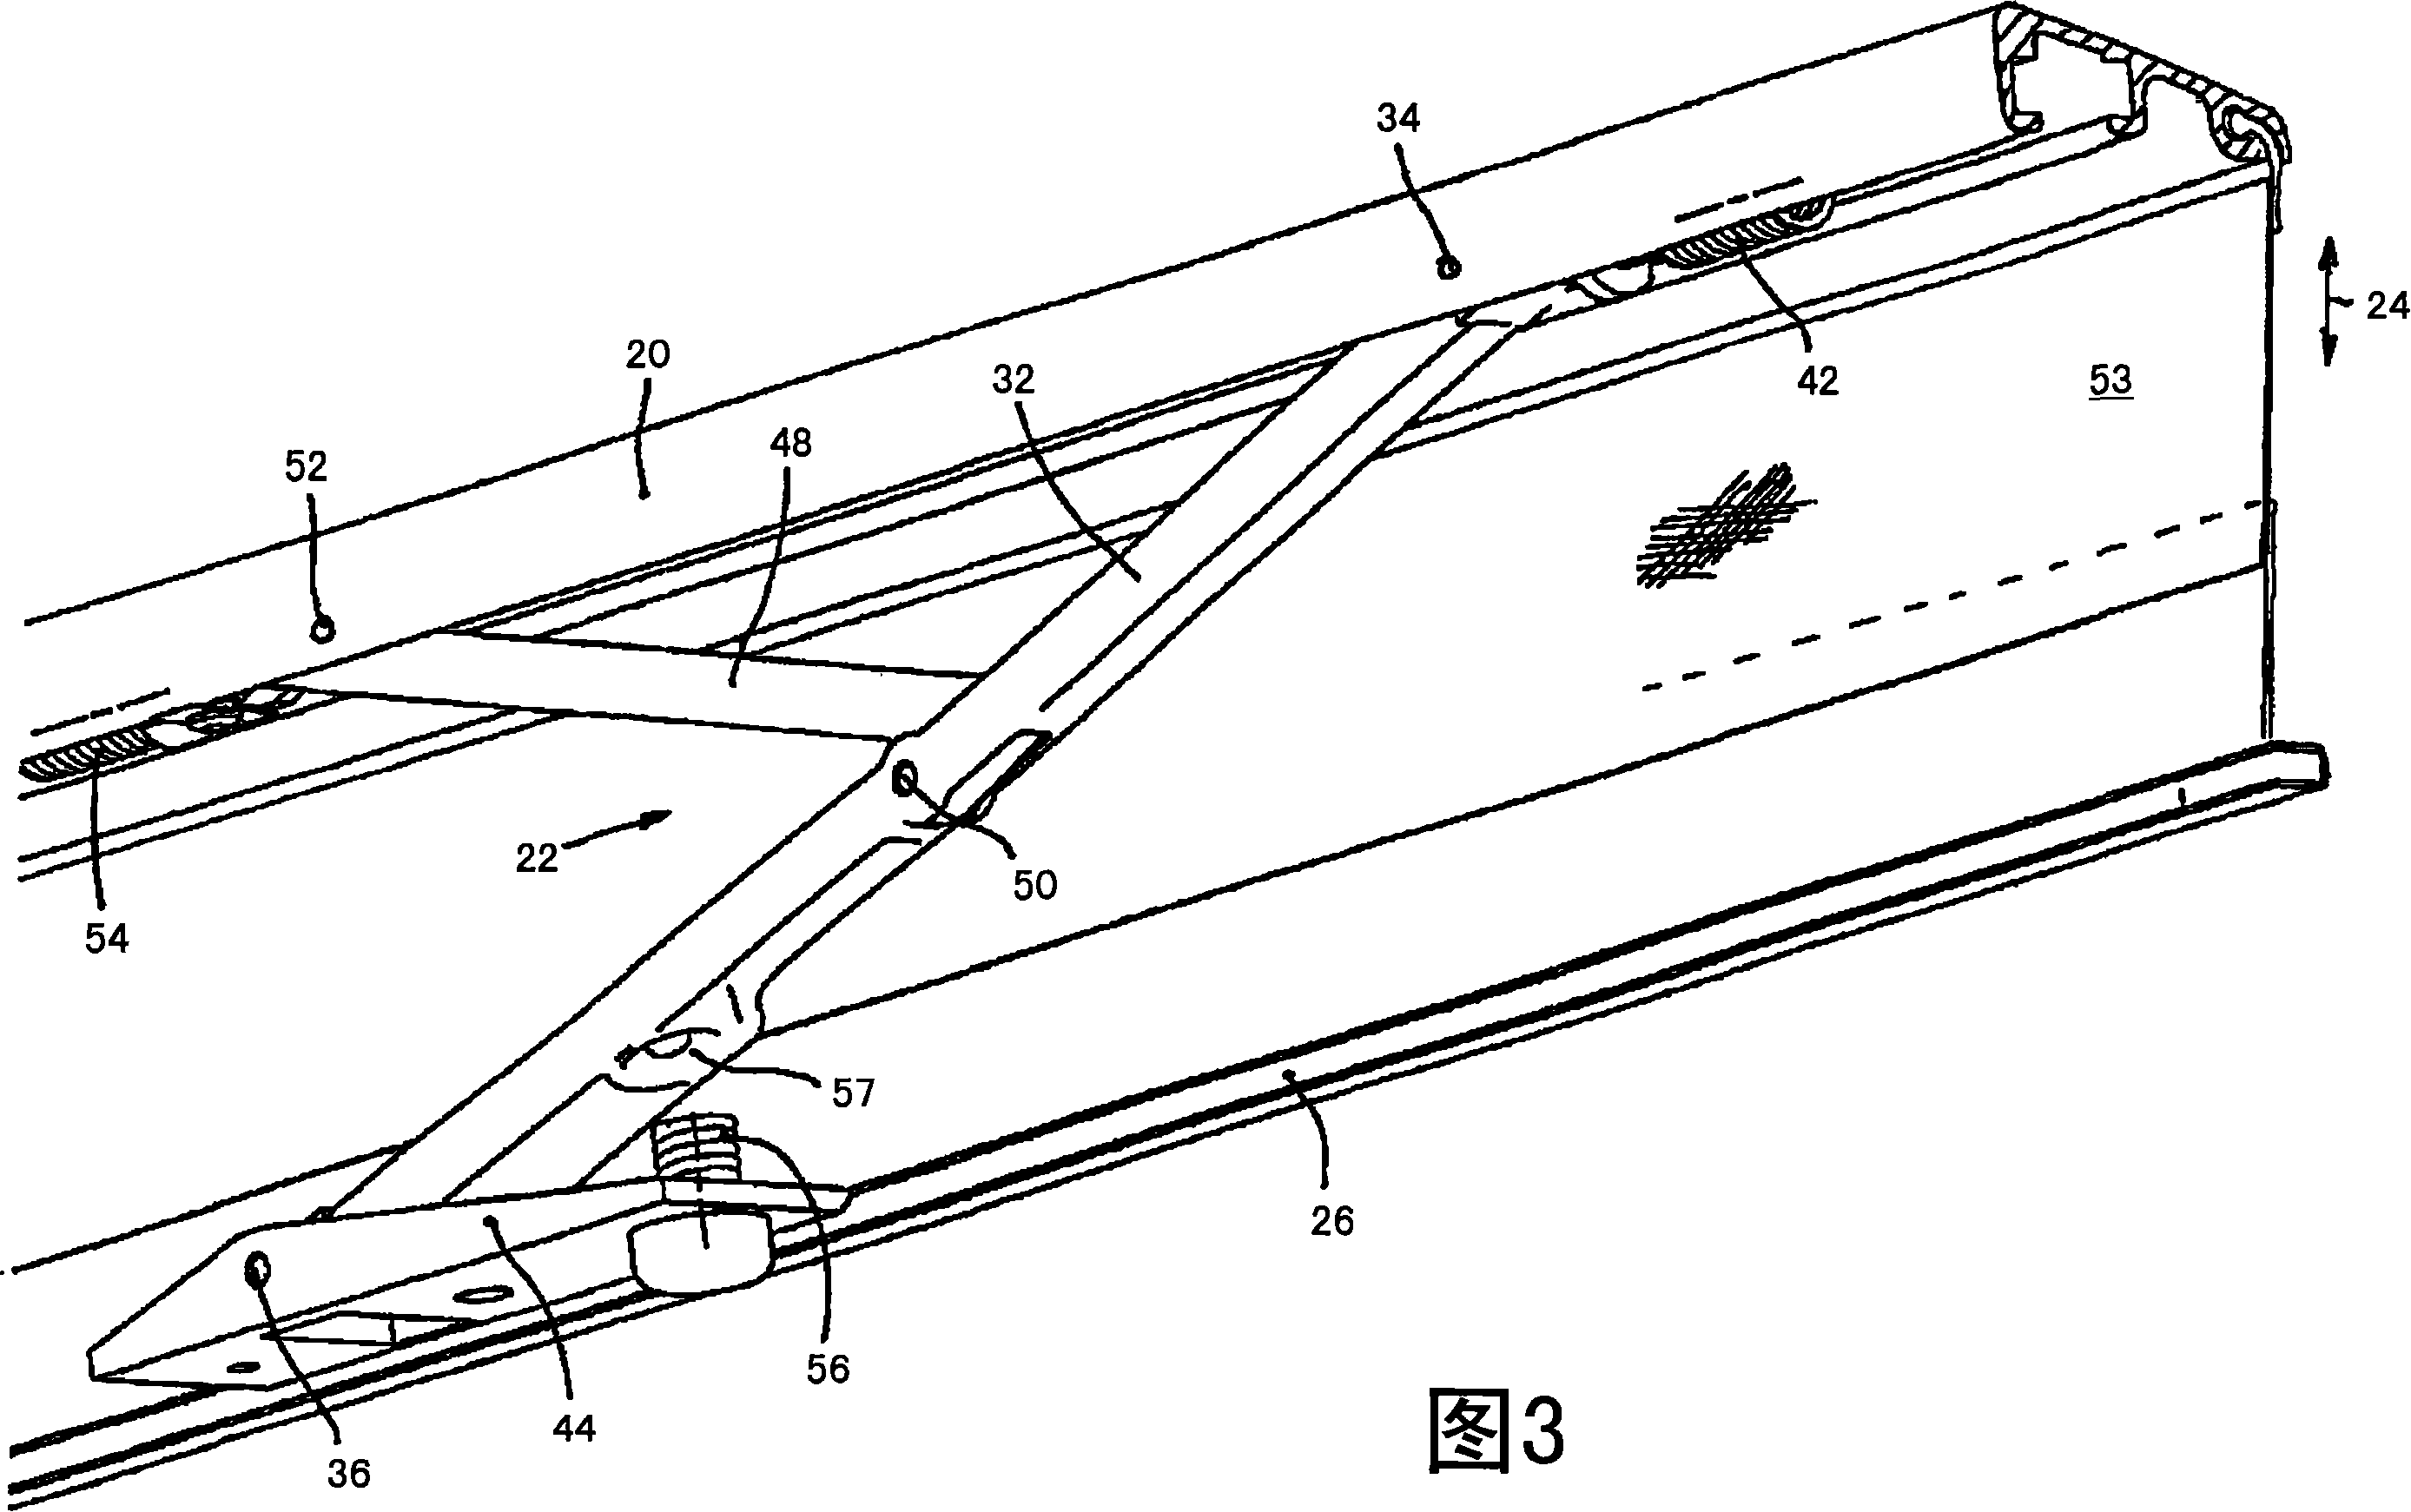 Wind repelling system for a vehicle